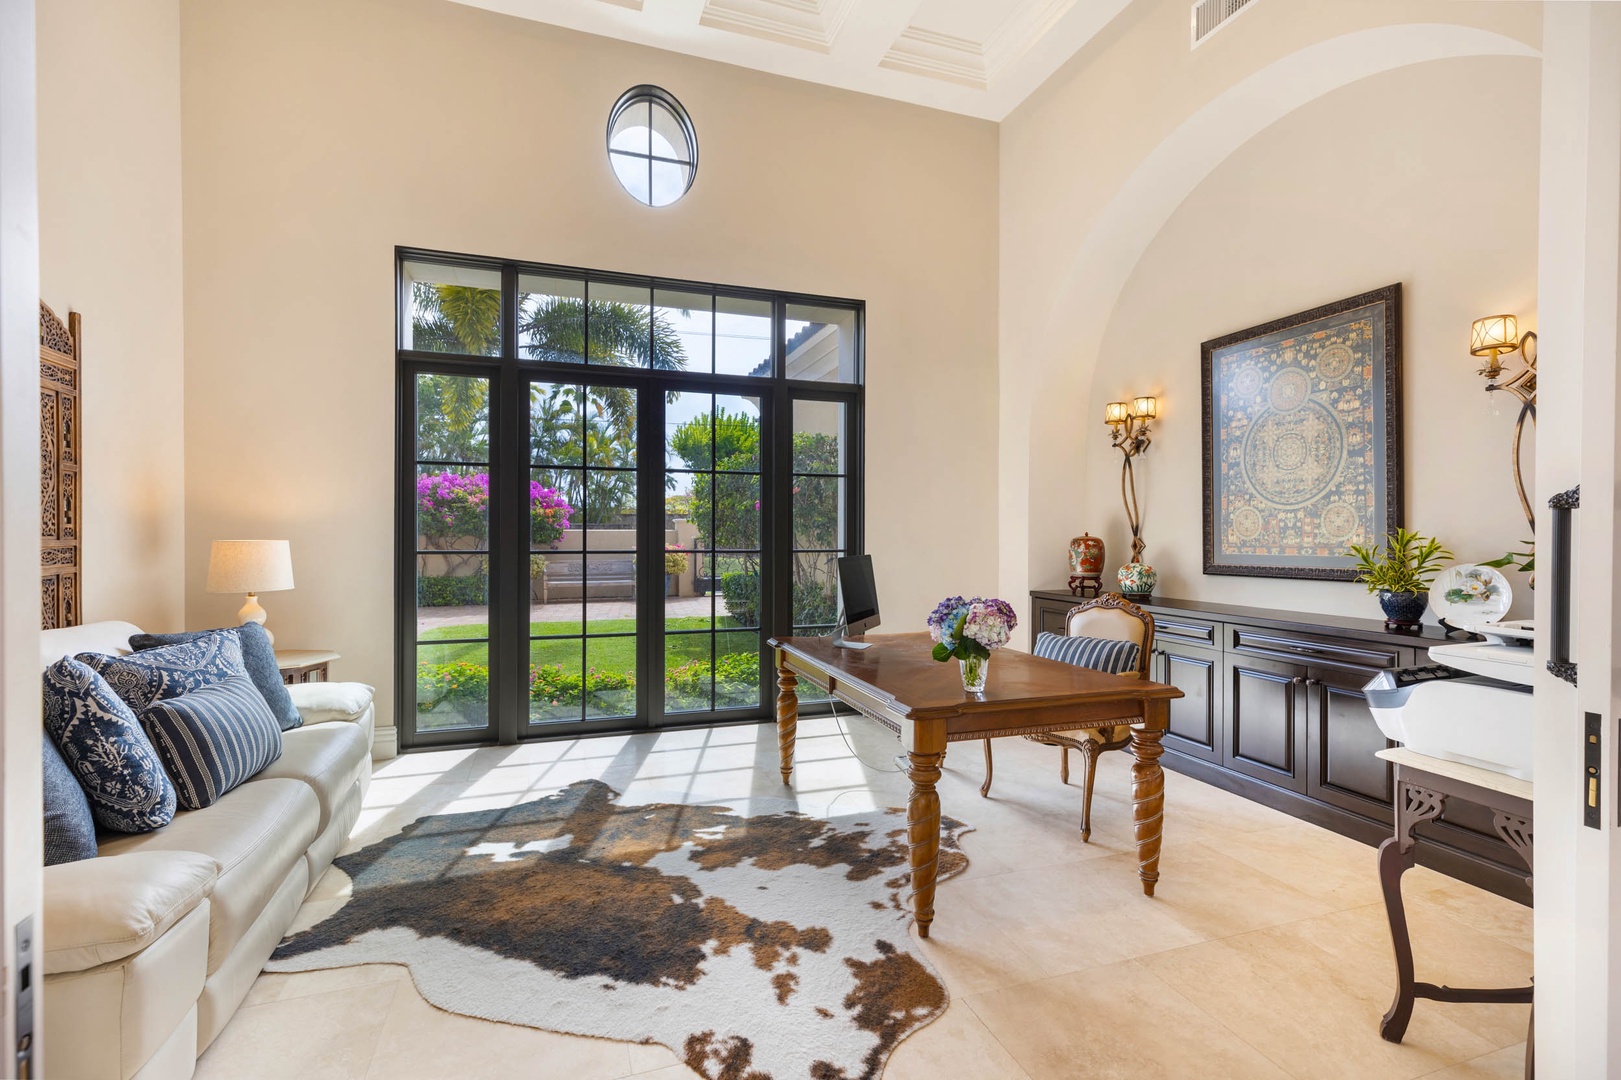 Honolulu Vacation Rentals, The Kahala Mansion - Elegant interior space featuring tall black-framed French windows.